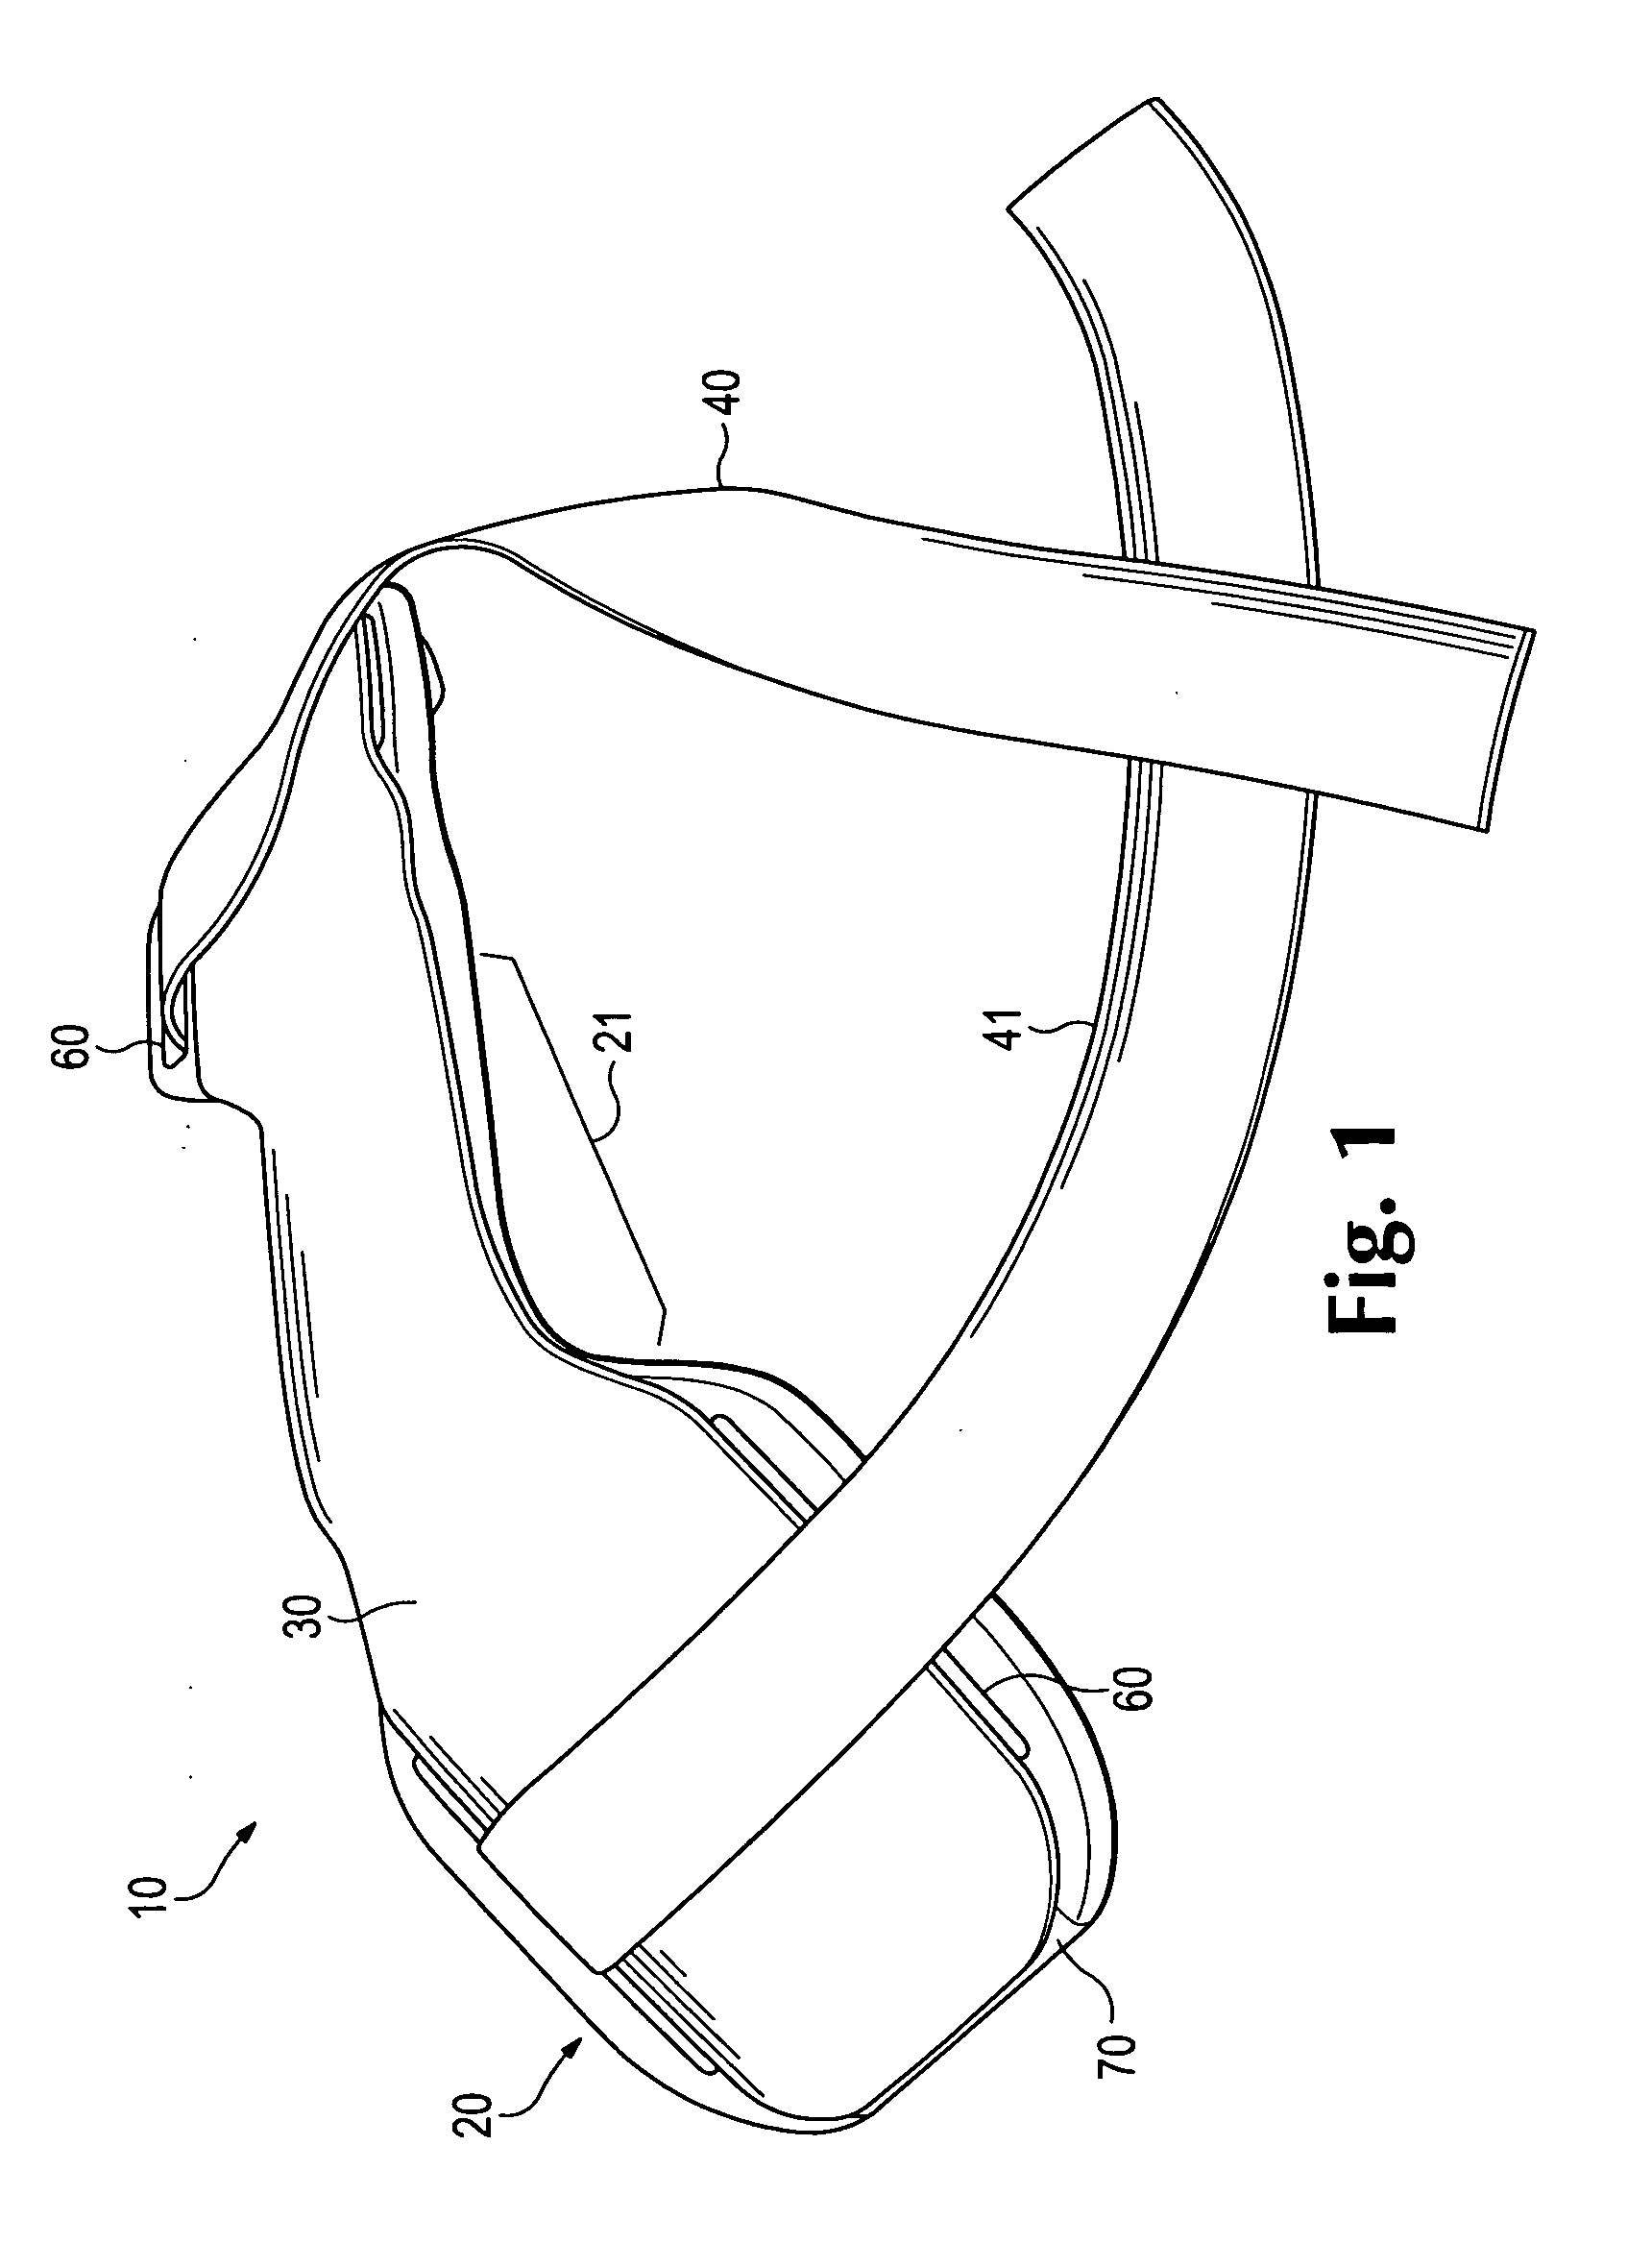 Apparatus and method of use for a wrist extension brace